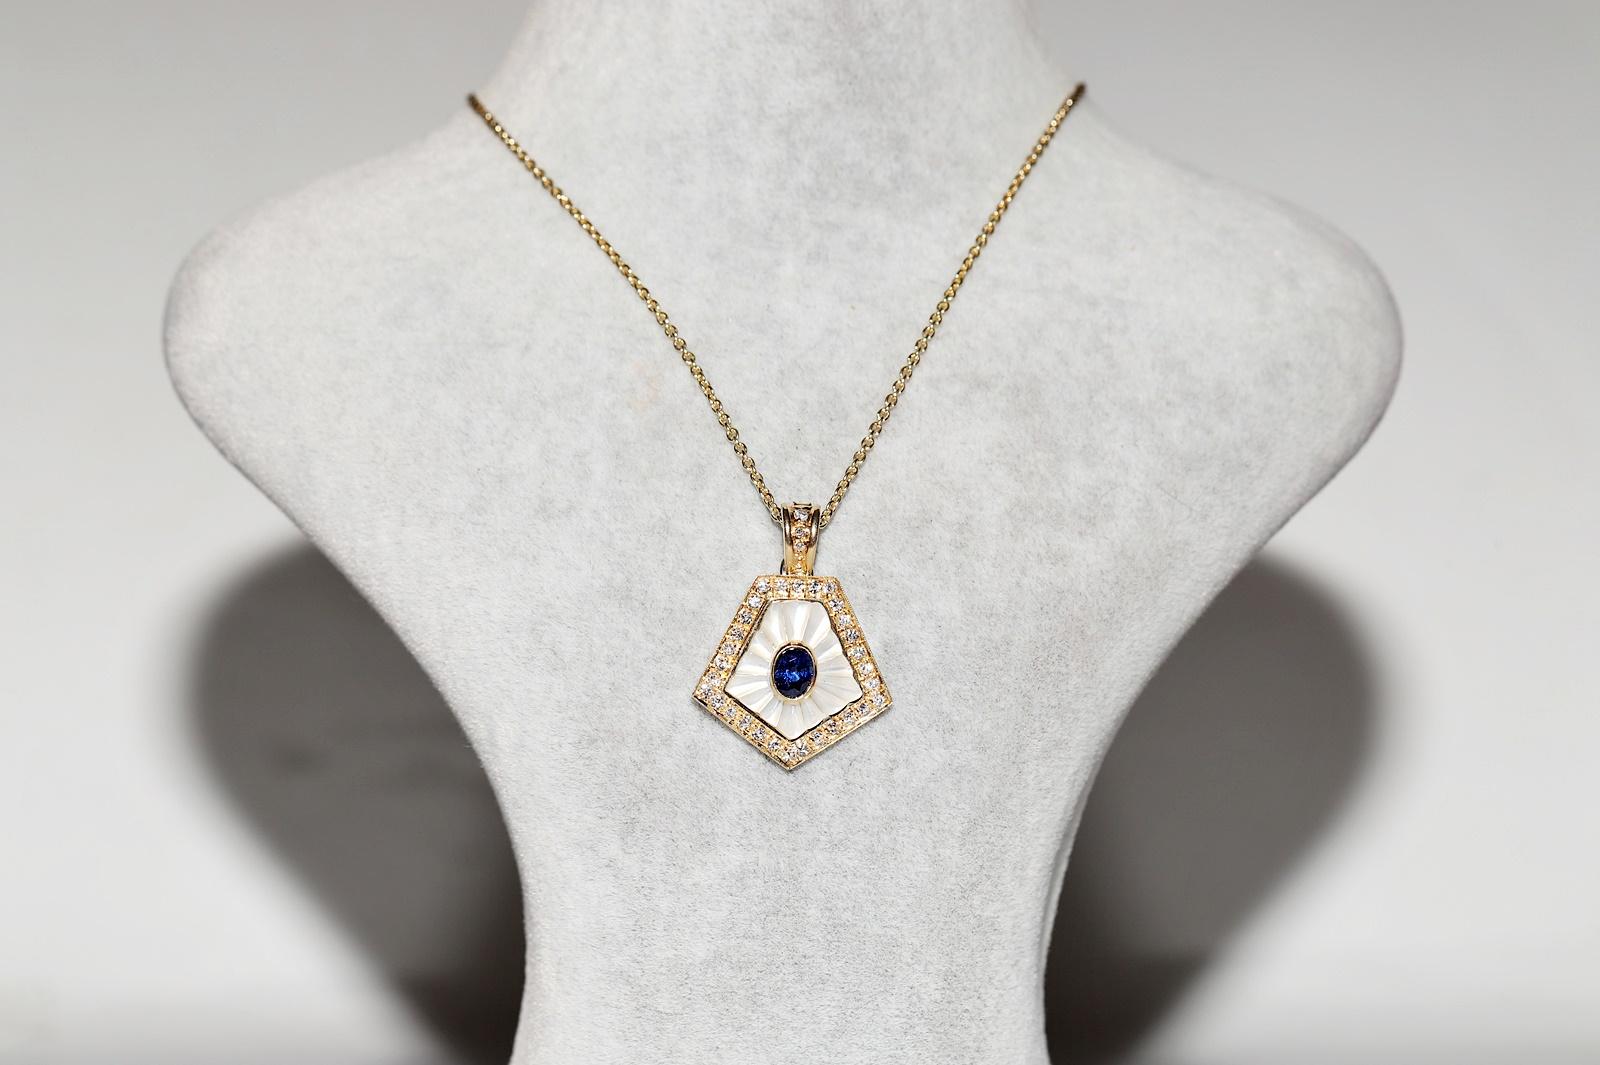 In very good condition.
Total weight is 8.6 grams.
Total weight is diamond 0.70 ct.
The diamond is has F-G color and vvs-vs clarity.
Totally is sapphire 0.55 ct.
Total lenght is chain 45 cm.
Please contact for any questions.